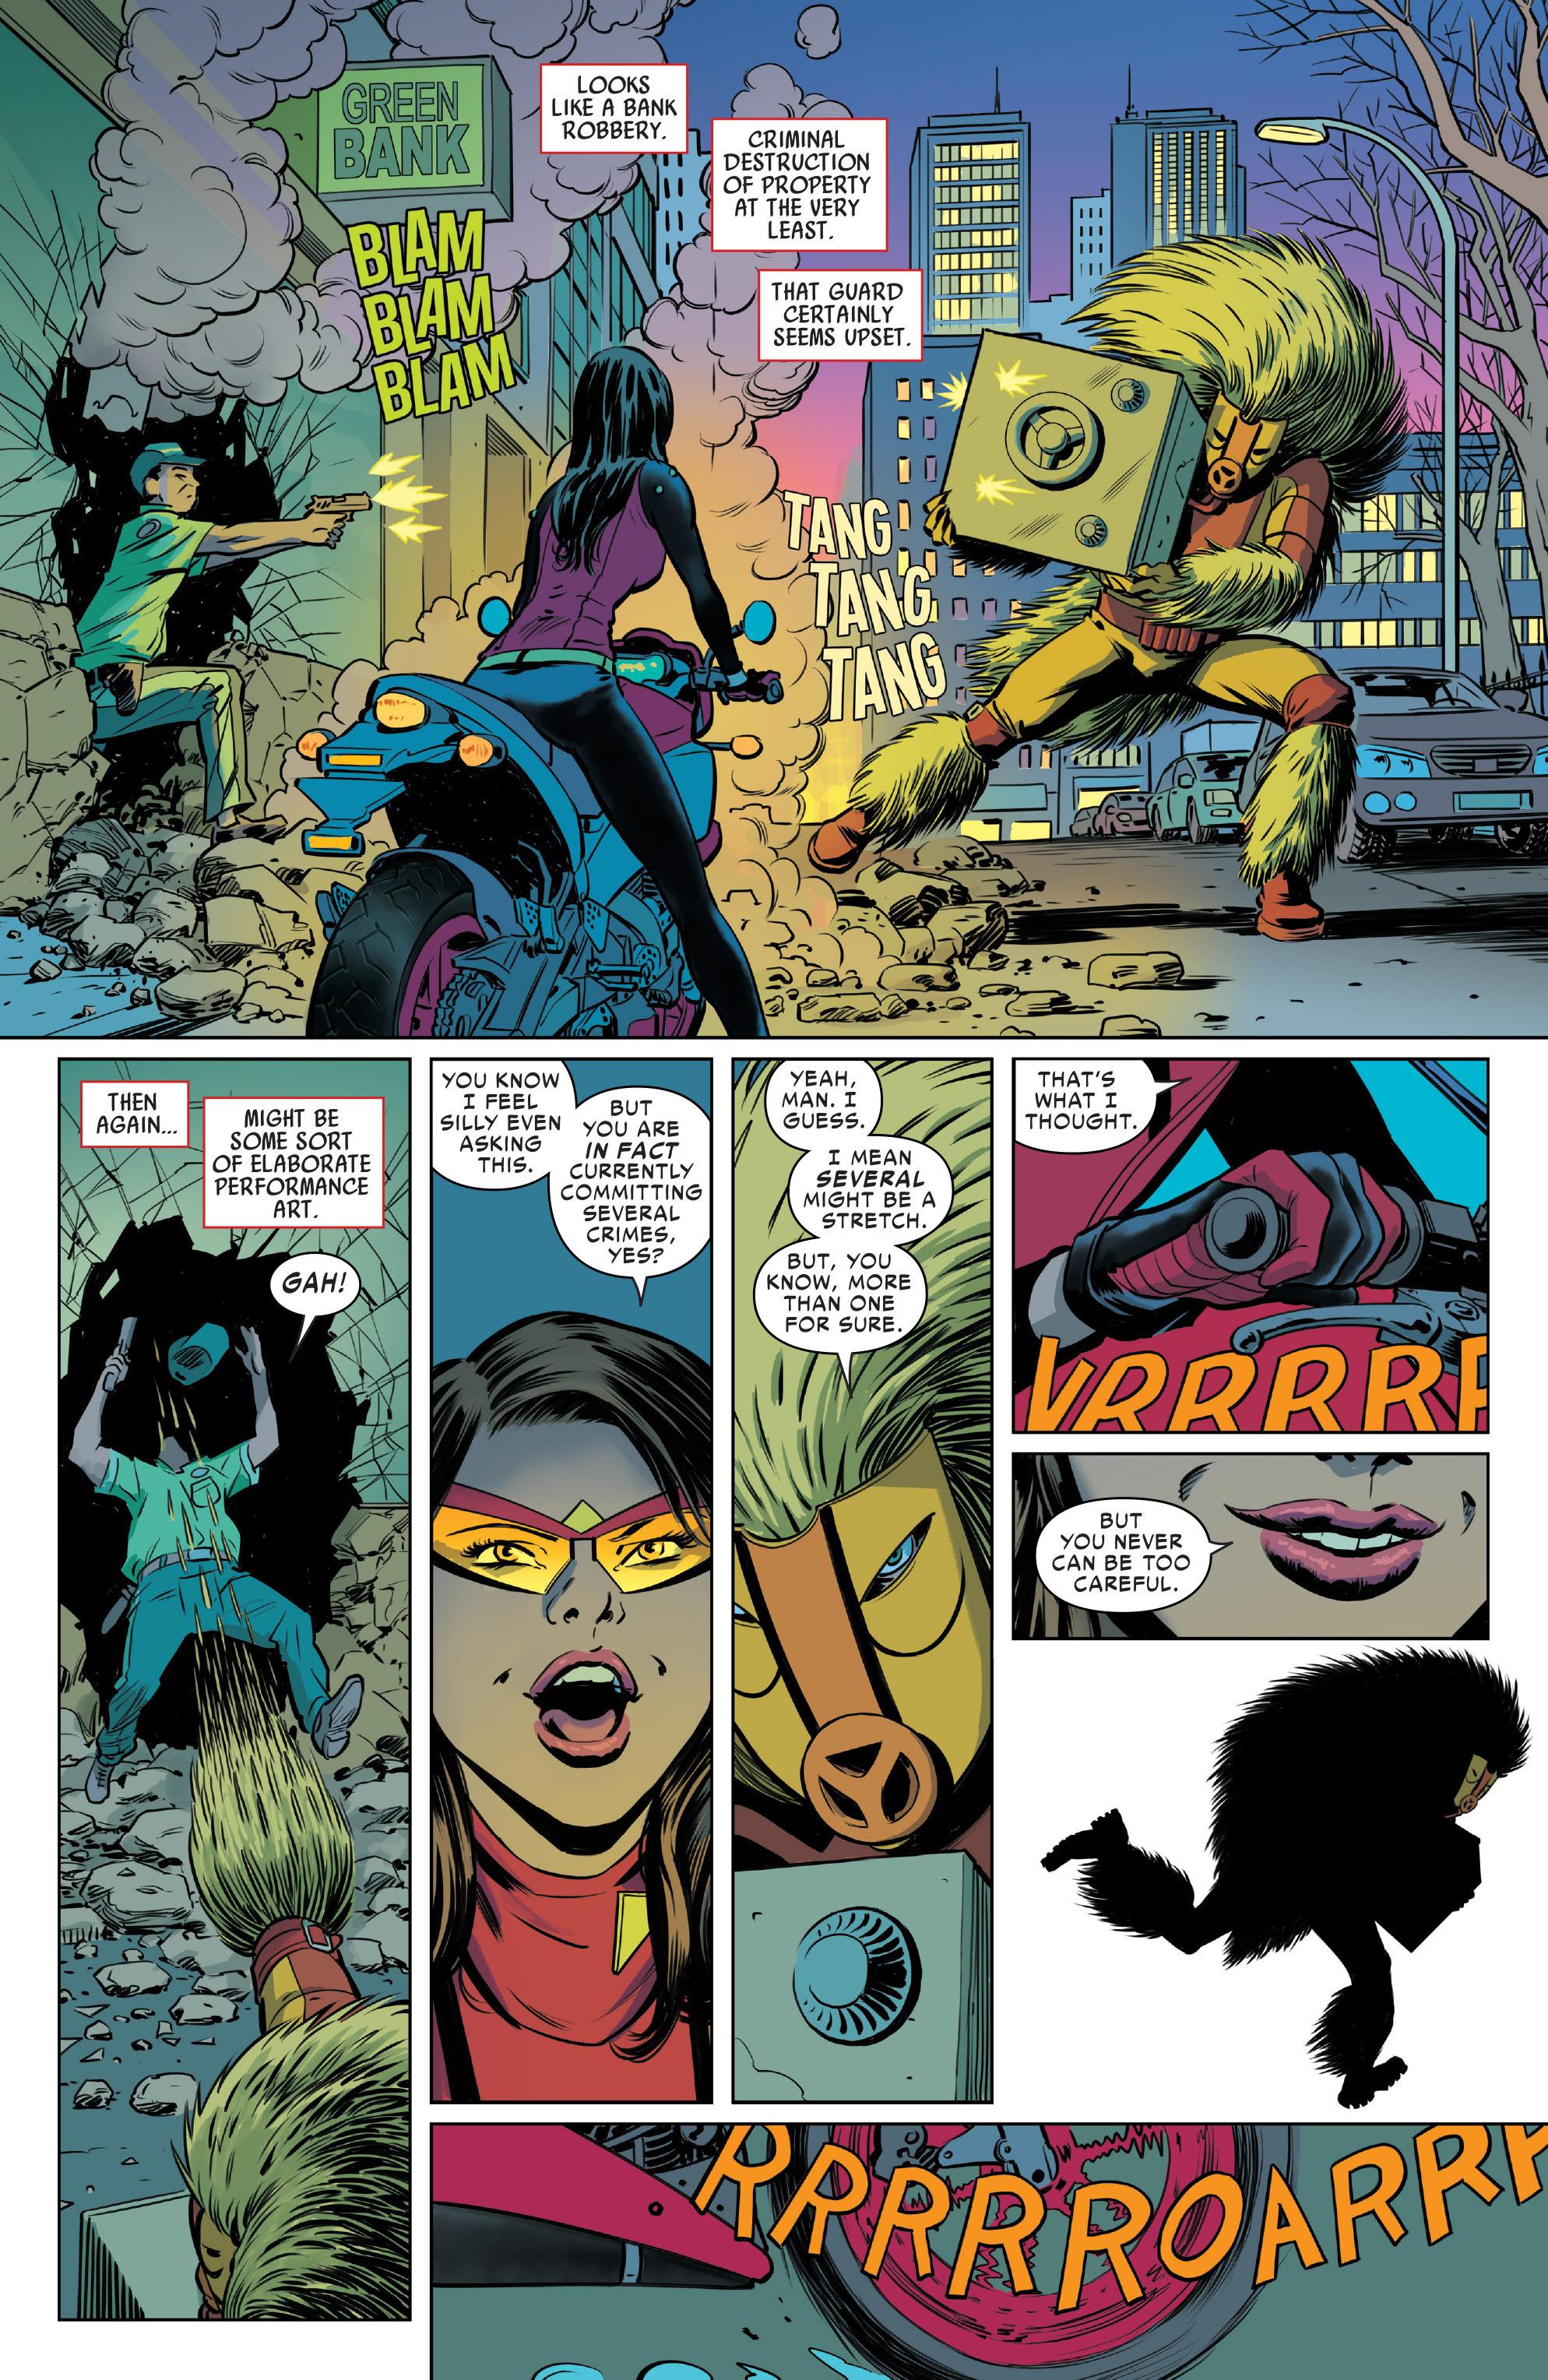 Spider-Woman New Duds review